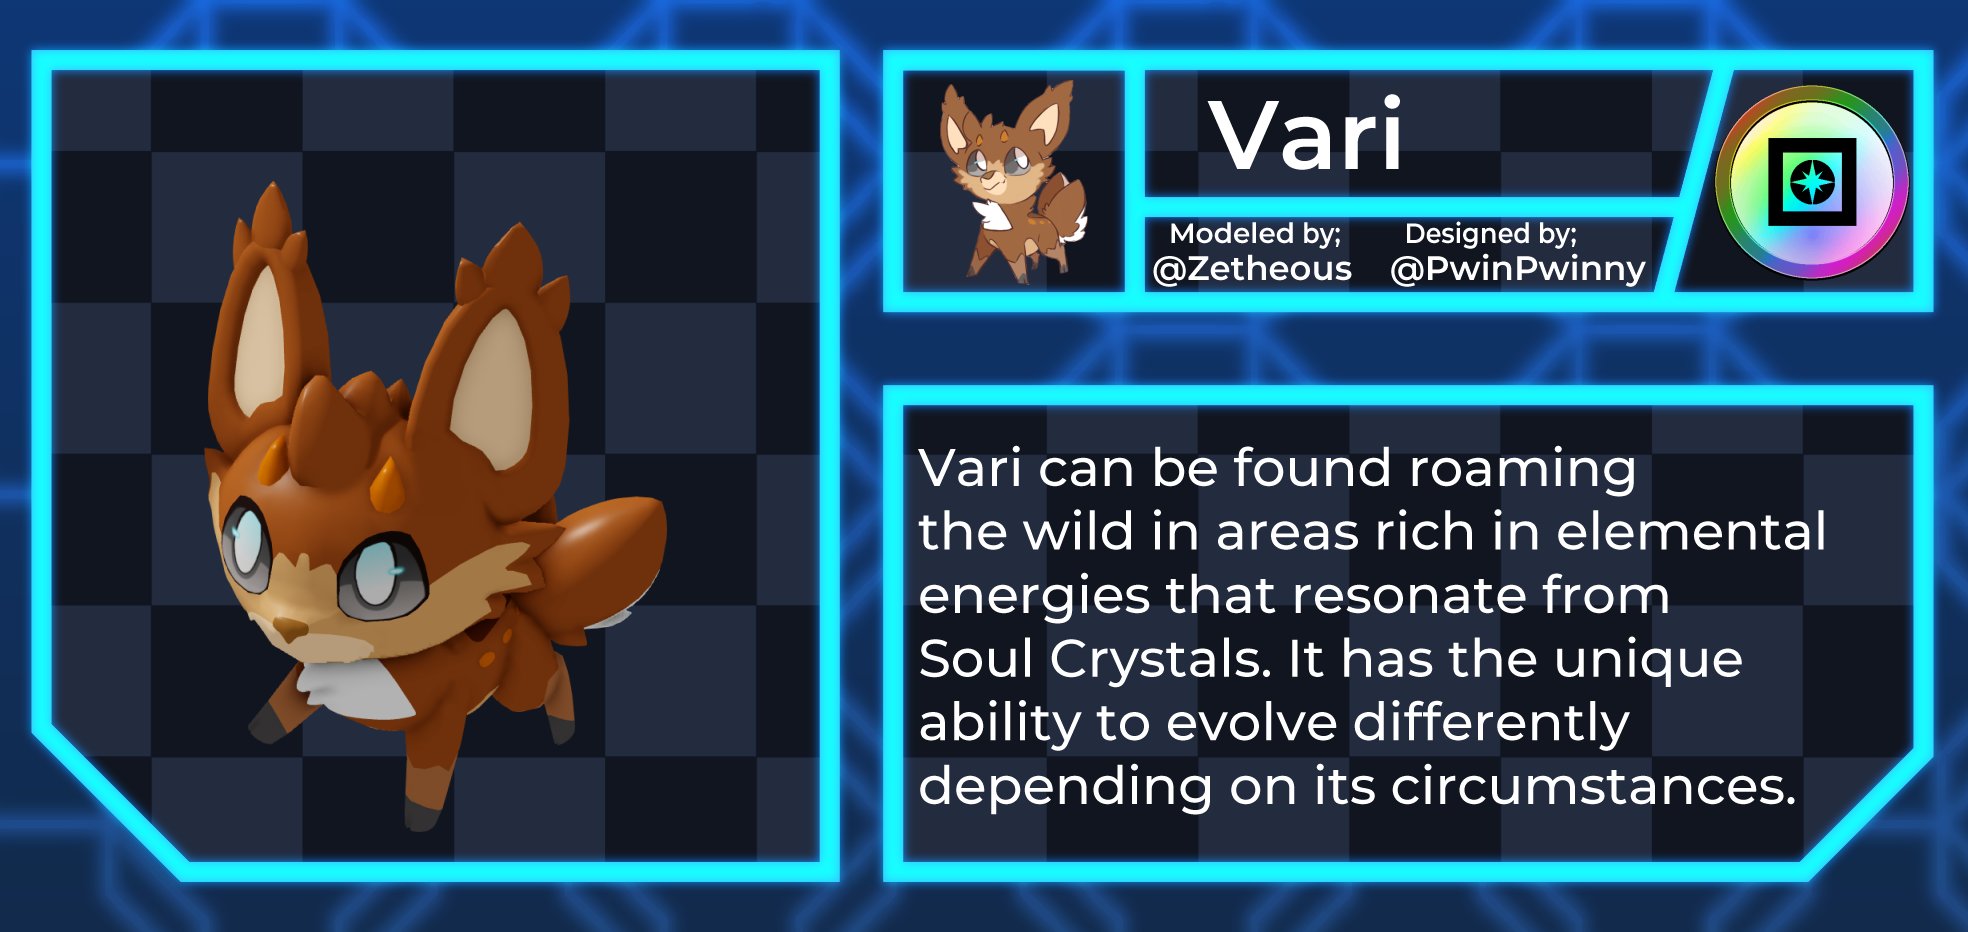 Loomian Legacy: How to get all Vari Evolutions? - DigiStatement